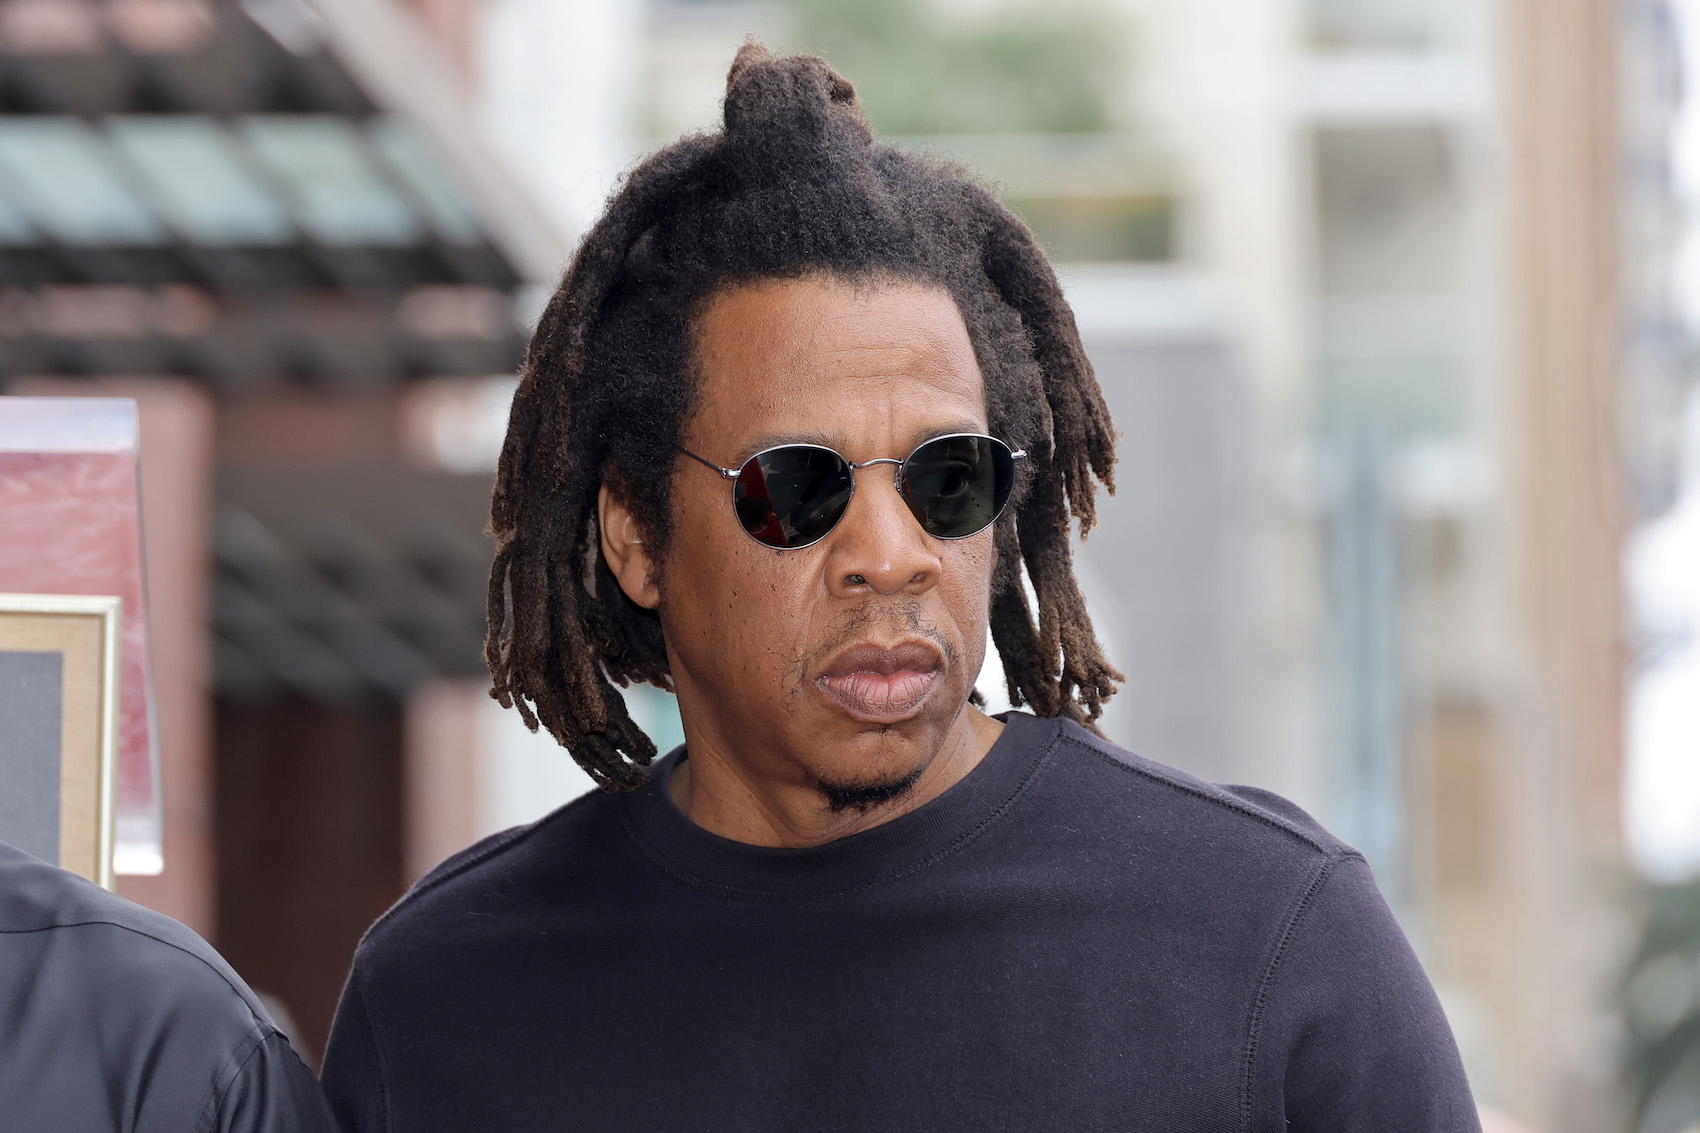 Jay-Z wearing a black shirt and sunglasses